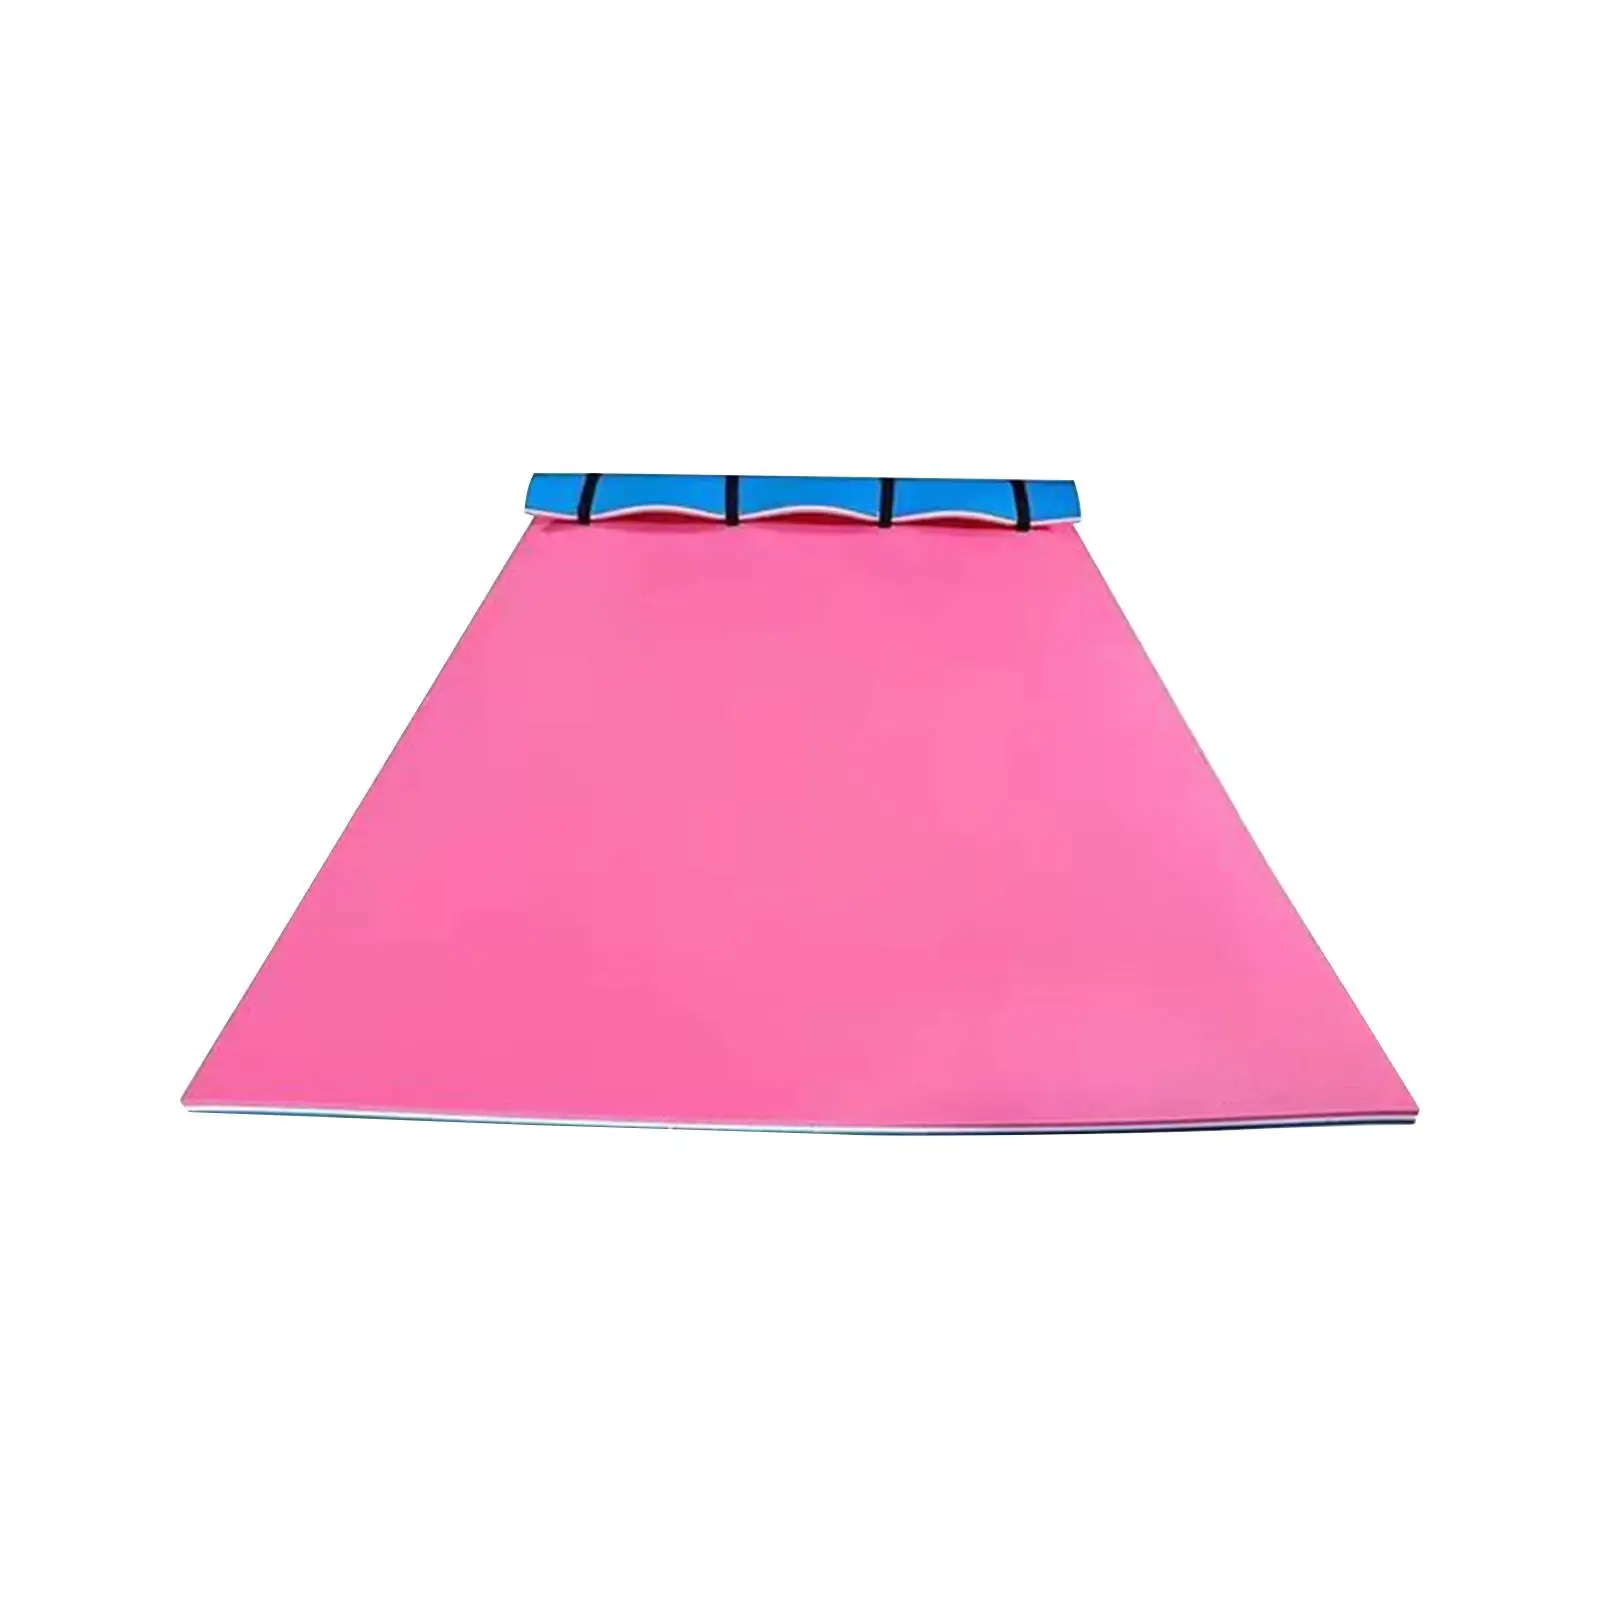 Pool Water Floating Mat 3 Layer Water Raft 270x90x3.3cm Durable Portable Tear Resistant for Children and Adults (Random Color)